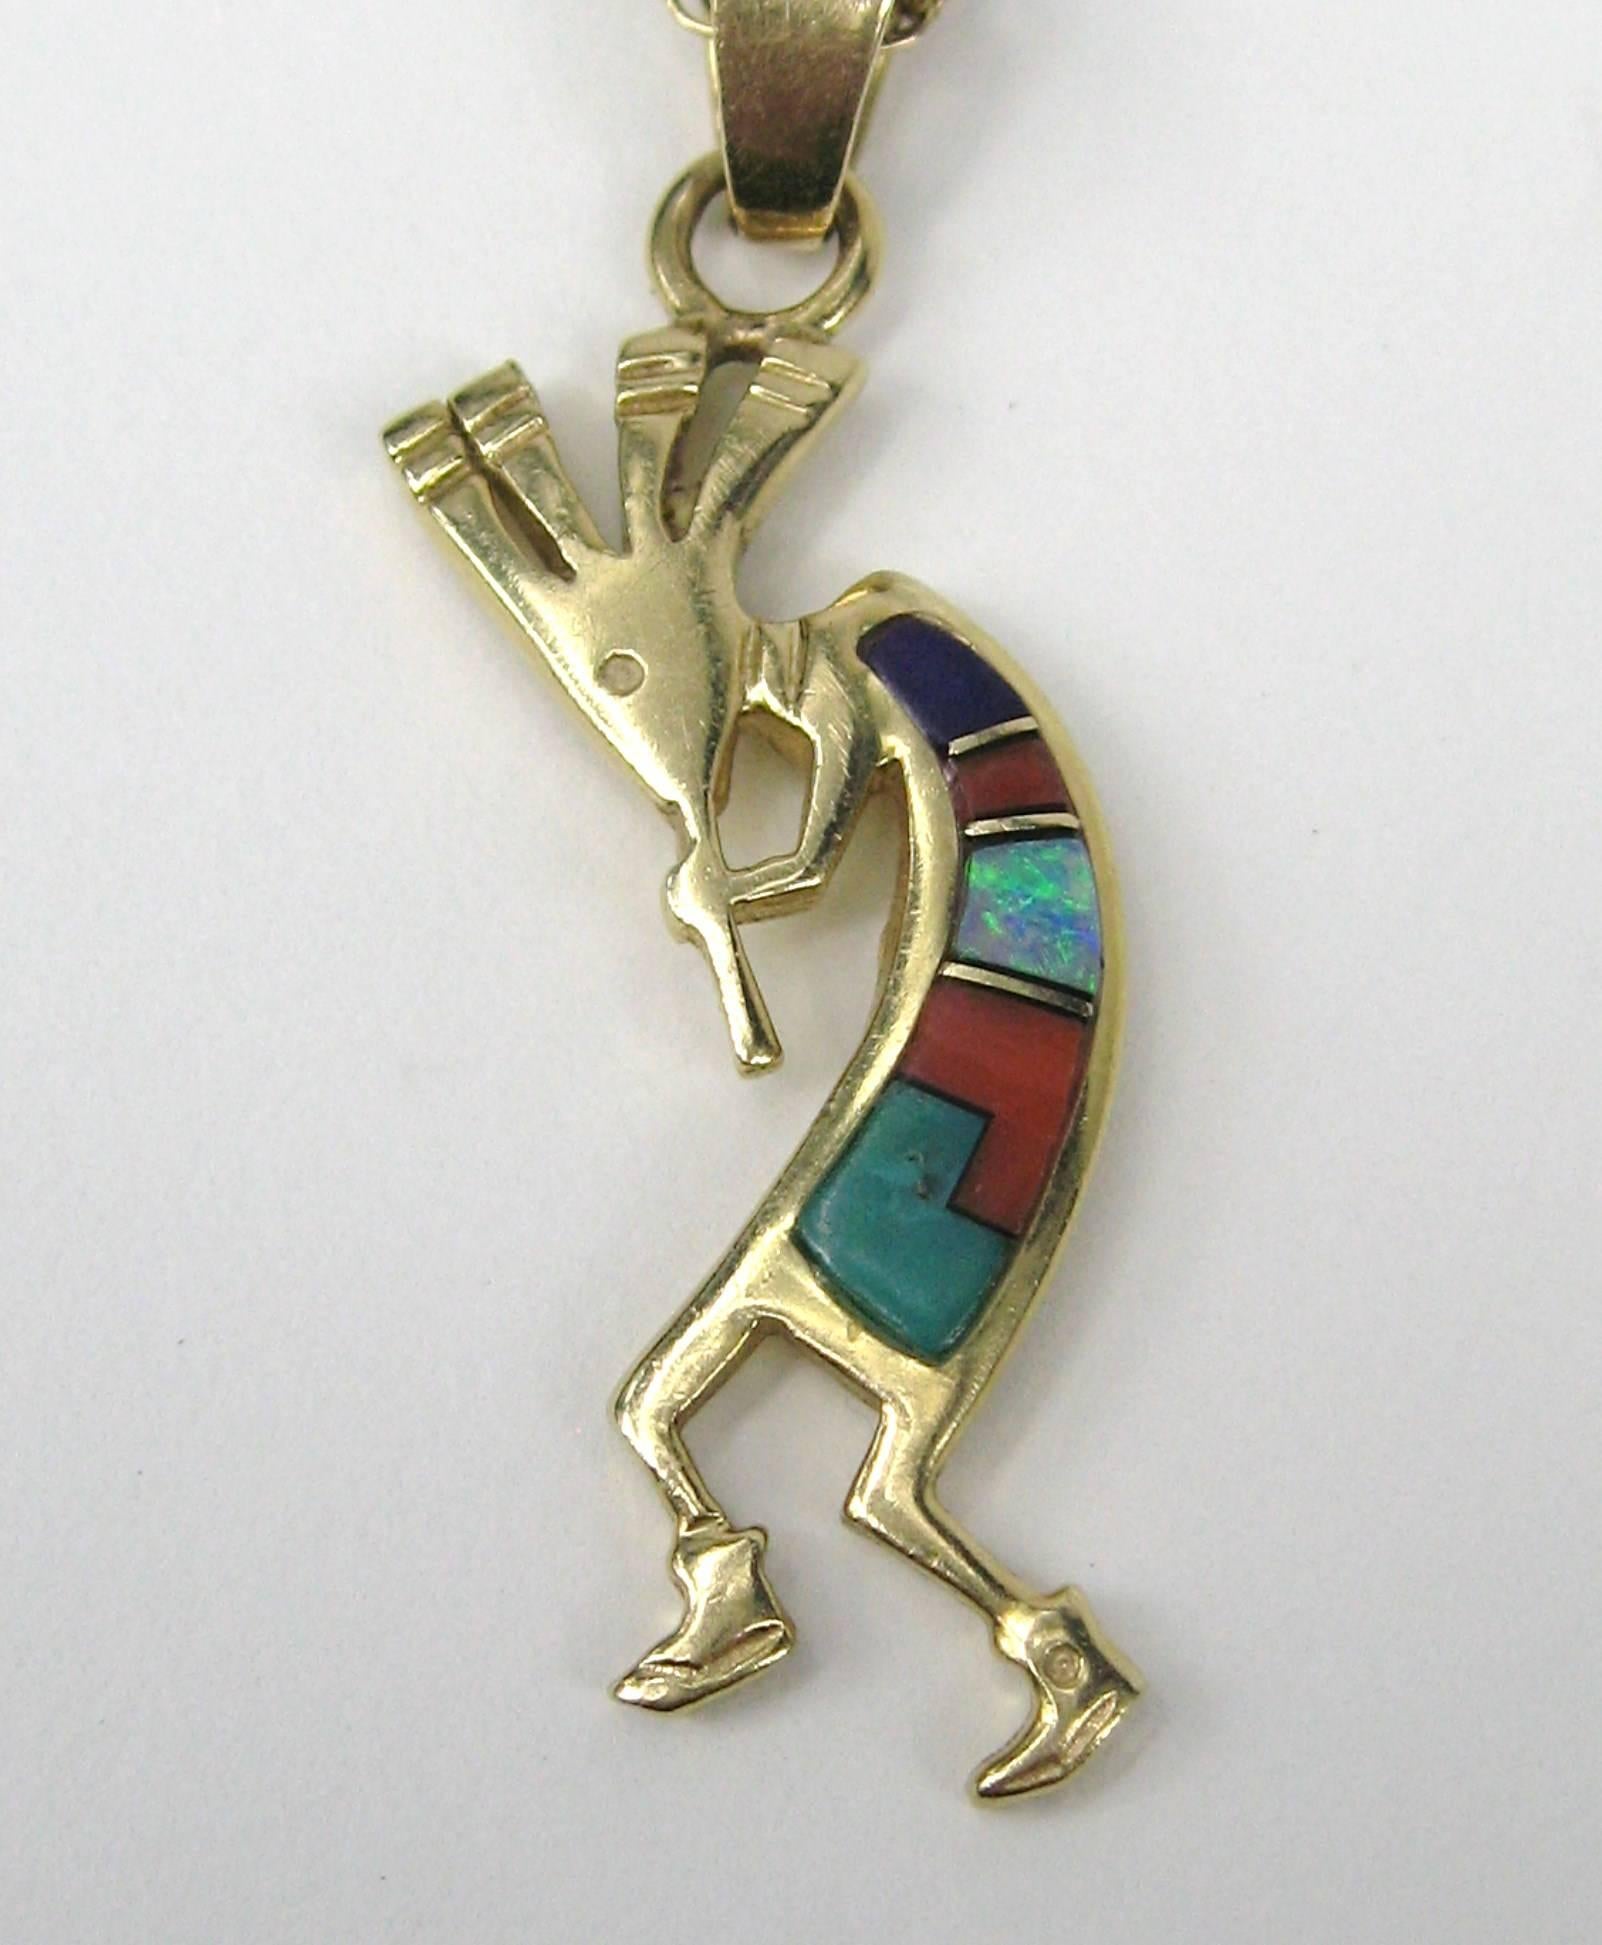 Southwestern 14k Gold Kachina. You see these a lot in silver but this one is made in 14K Gold Chain and Pendant. Inlaid stones made up the body. It measures 1.56 inches top to bottom .50 inches at the widest. Chain is 19 inches. Visit our store